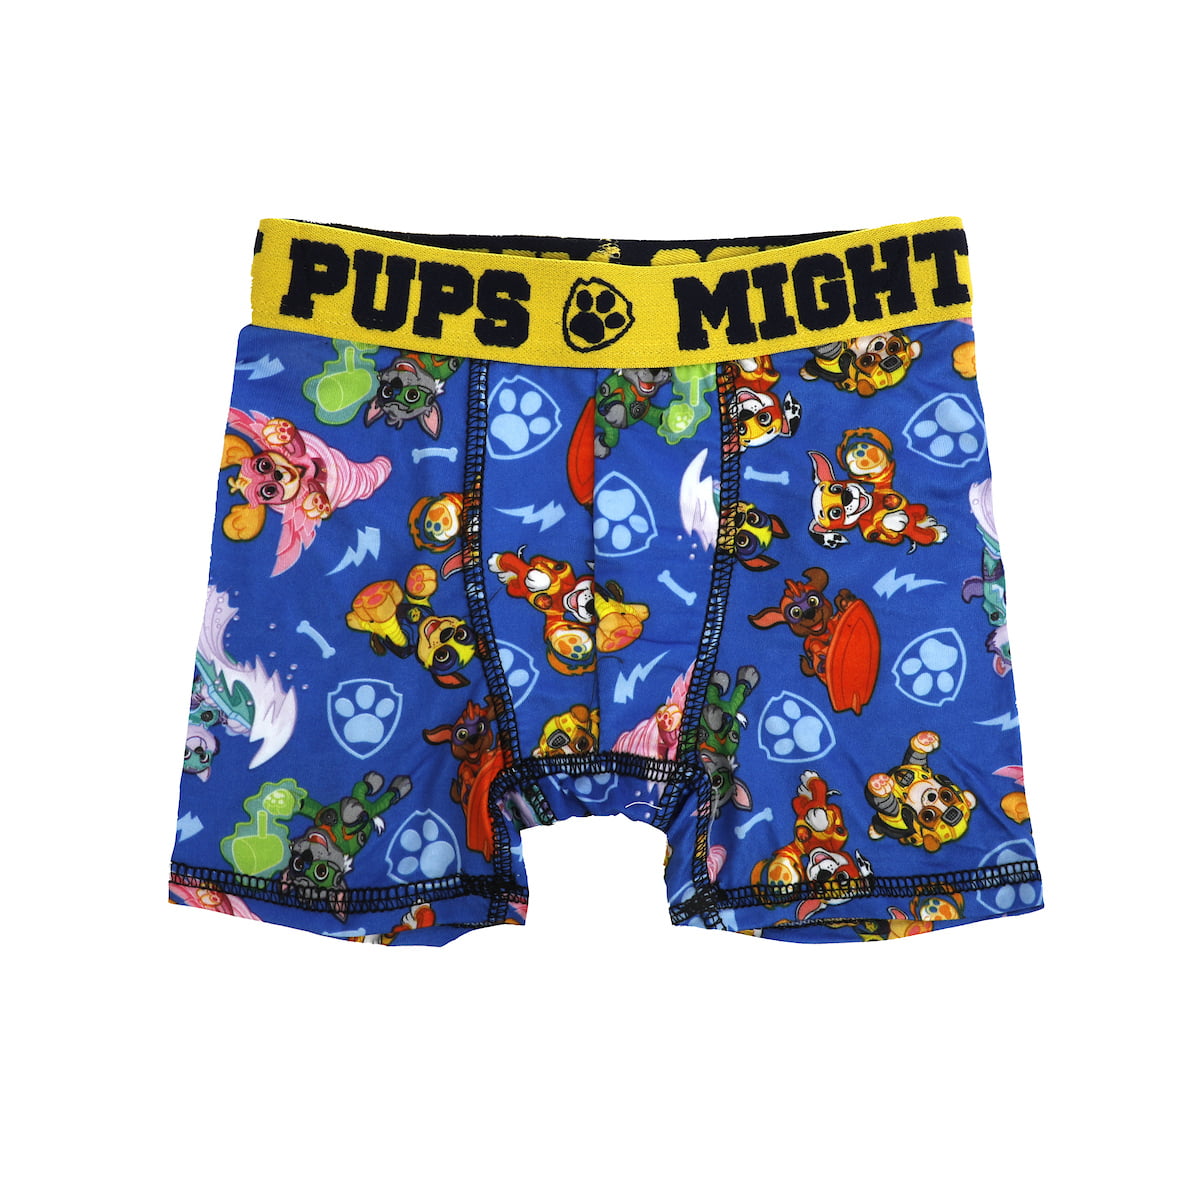 Paw Patrol Boxer Shorts Boys Paw Patrol Cotton Underwear Age 4-8 Years 2 In  A Pack - Online Character Shop